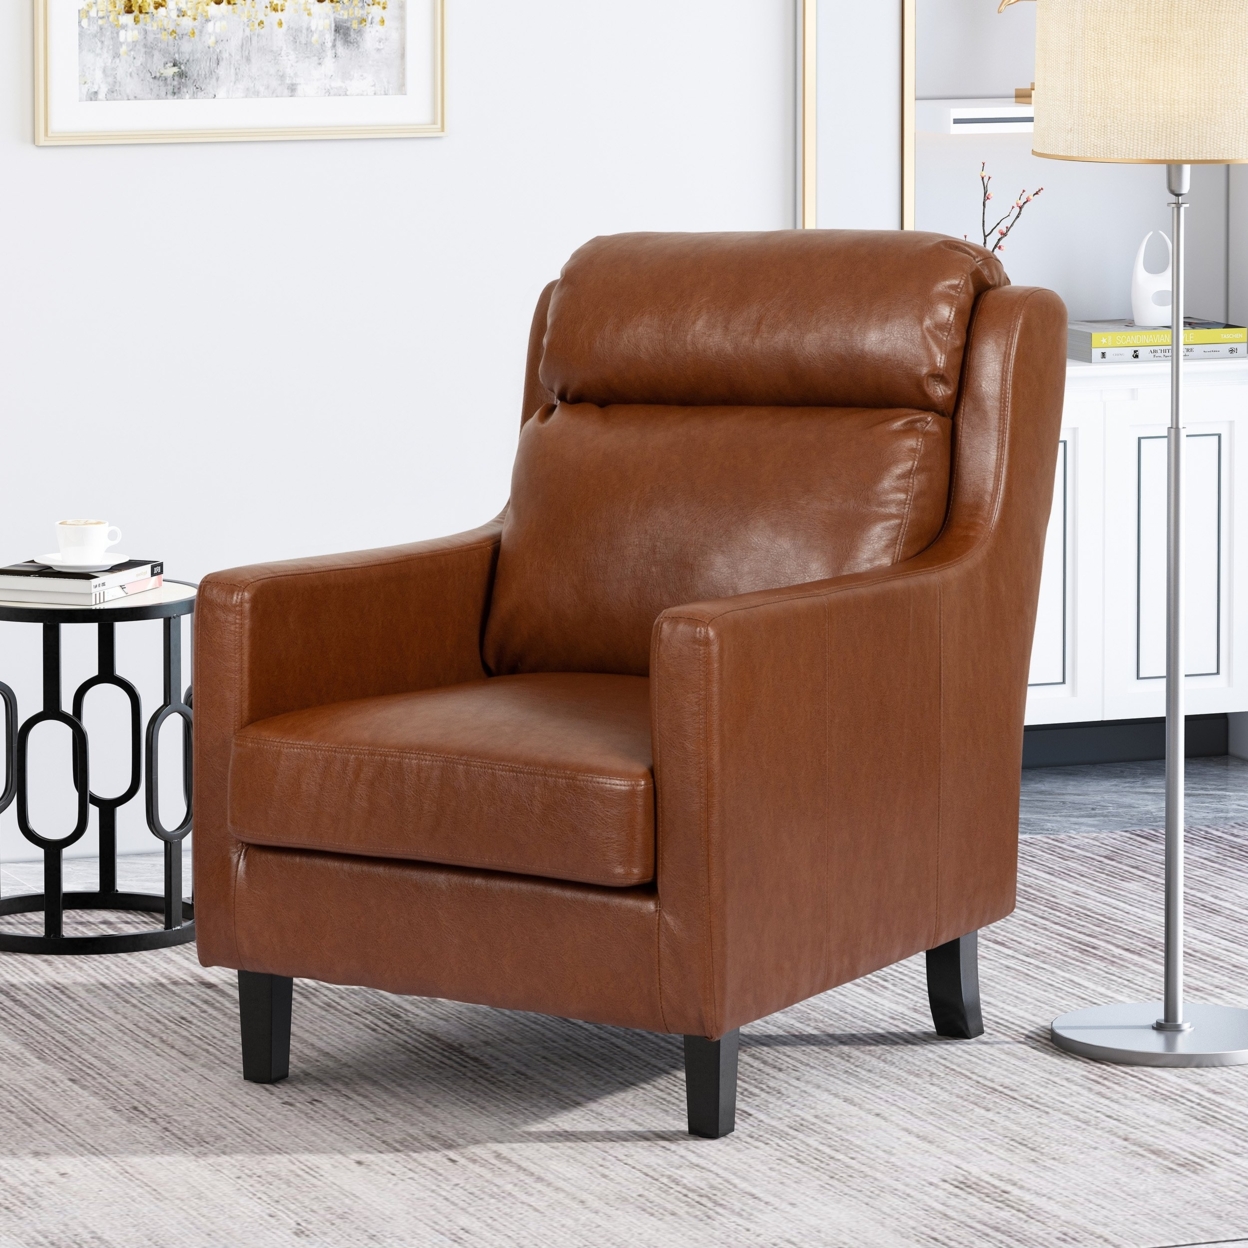 Baden Contemporary Pillow Tufted Faux Leather Club Chair - Cognac Brown